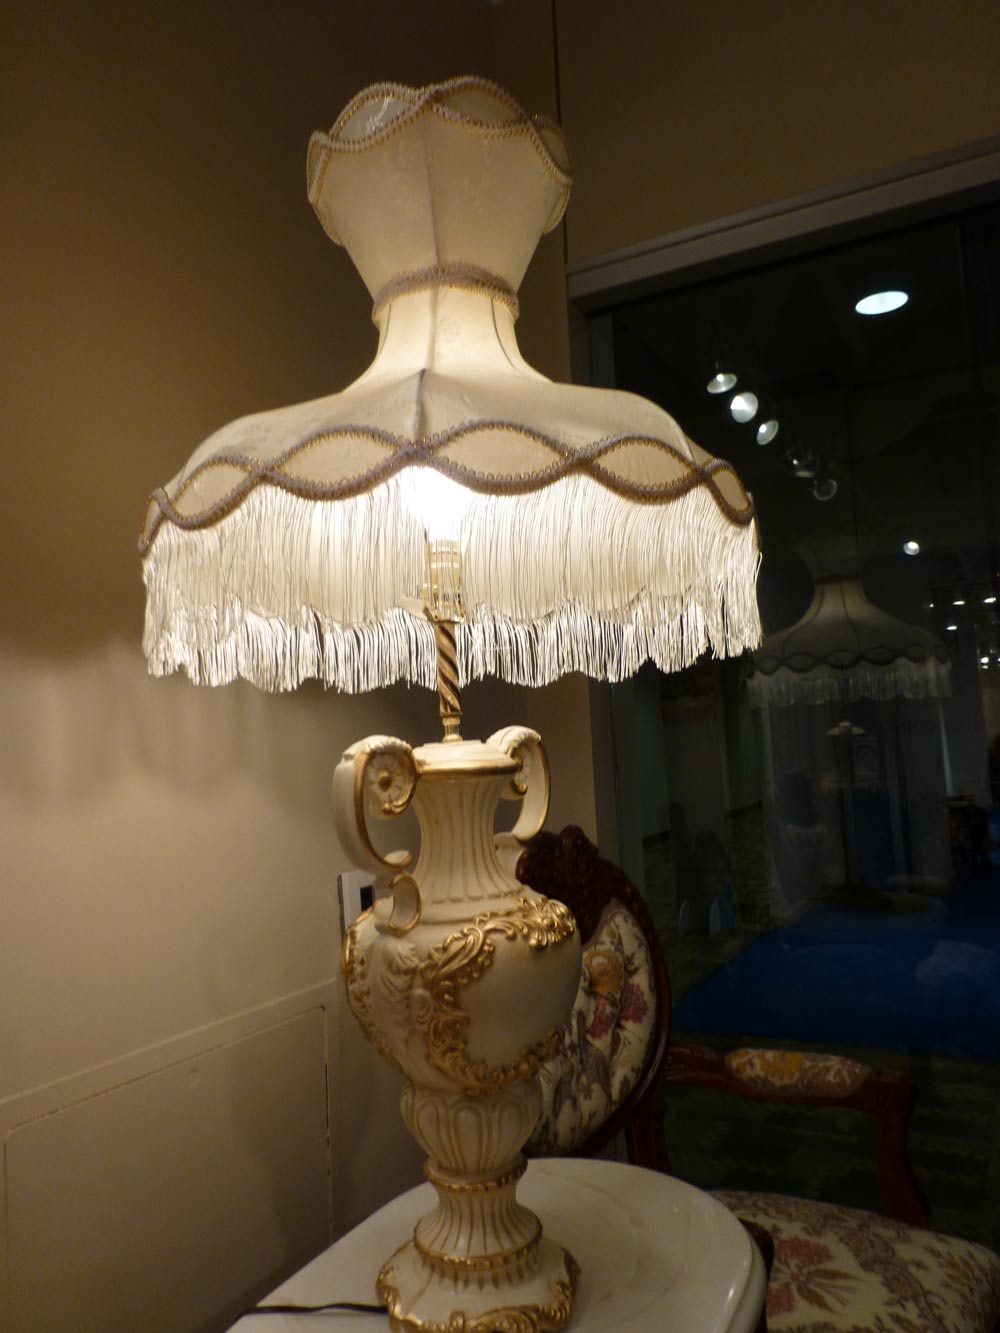 French Provincial Lamps, French Provincial Table Lamps